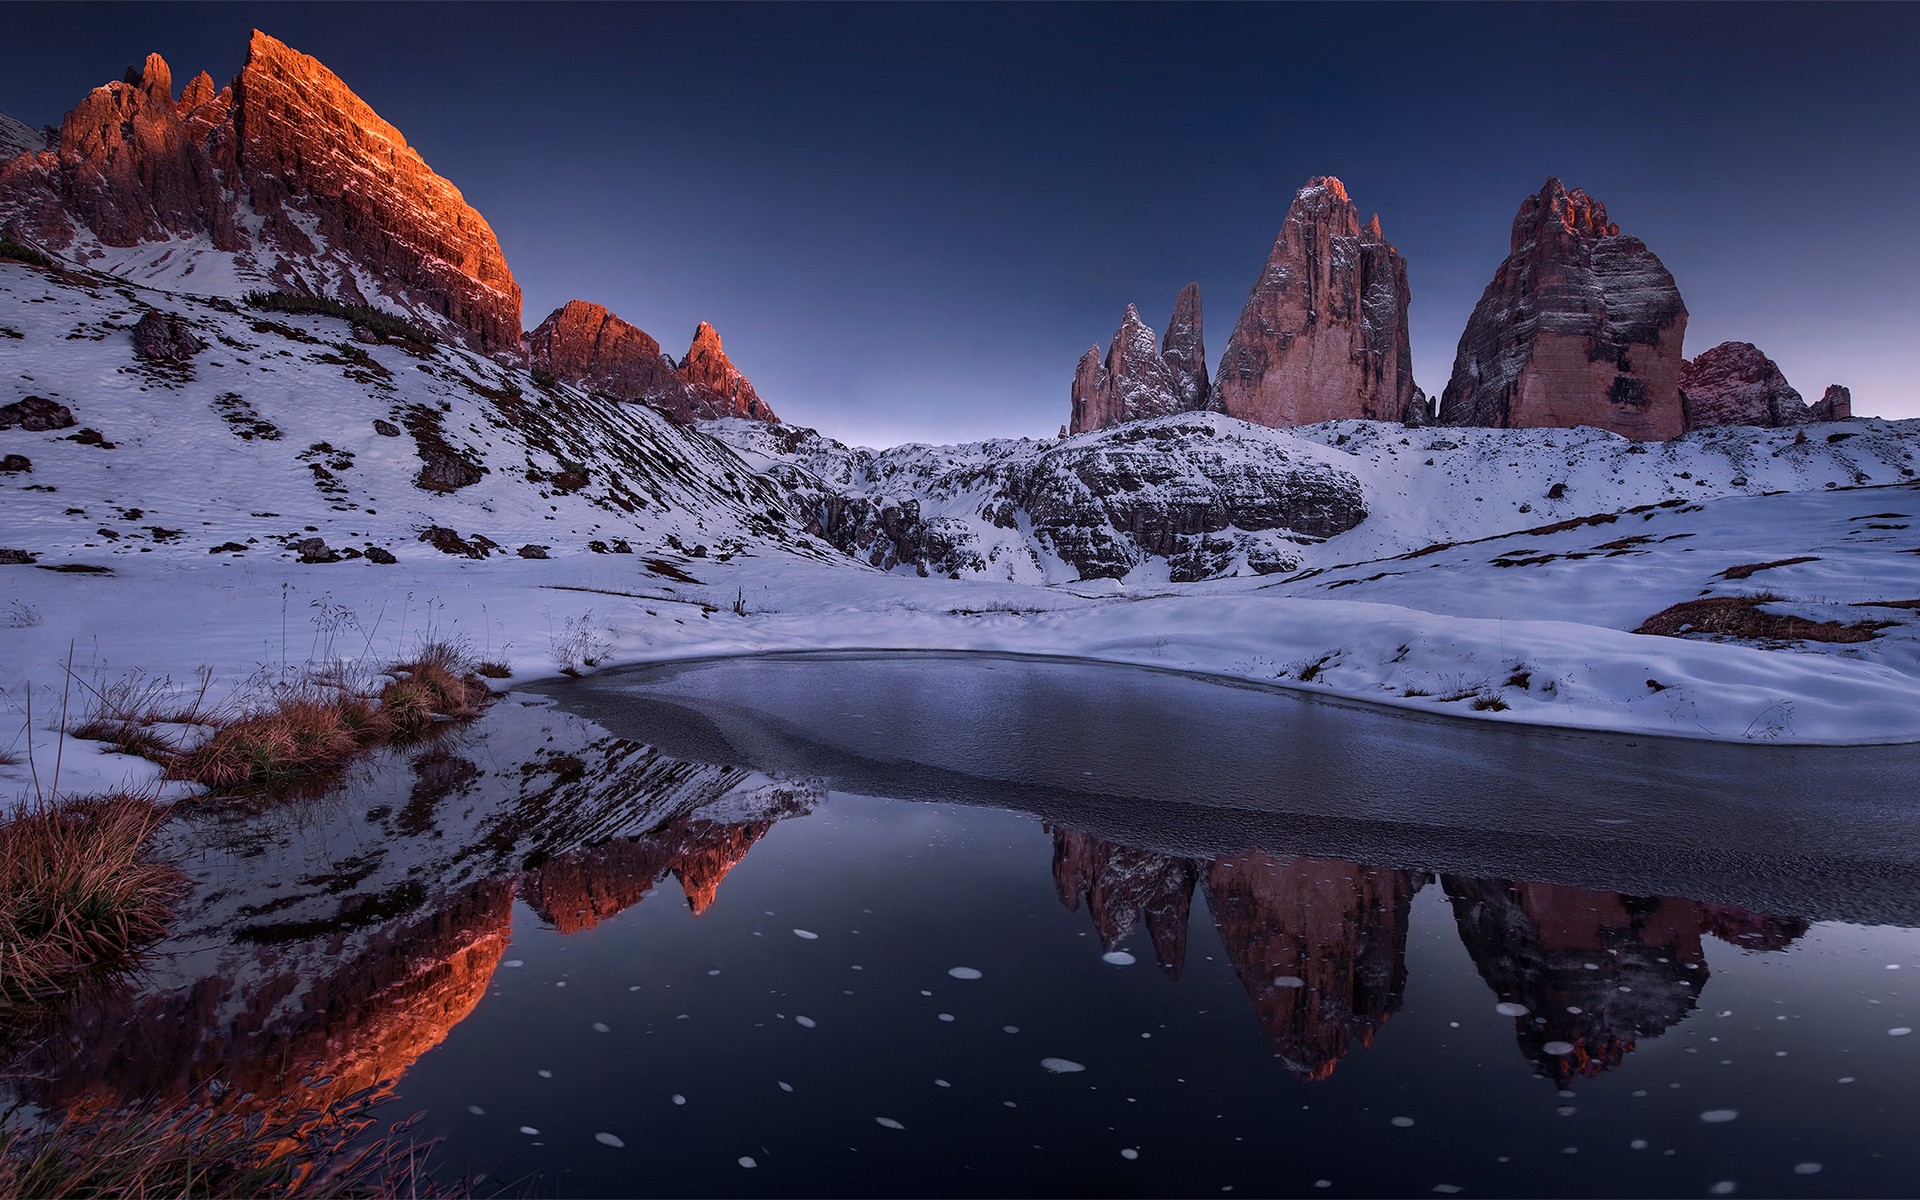 General 1920x1200 landscape rocks reflection snow mountains ice cold nature